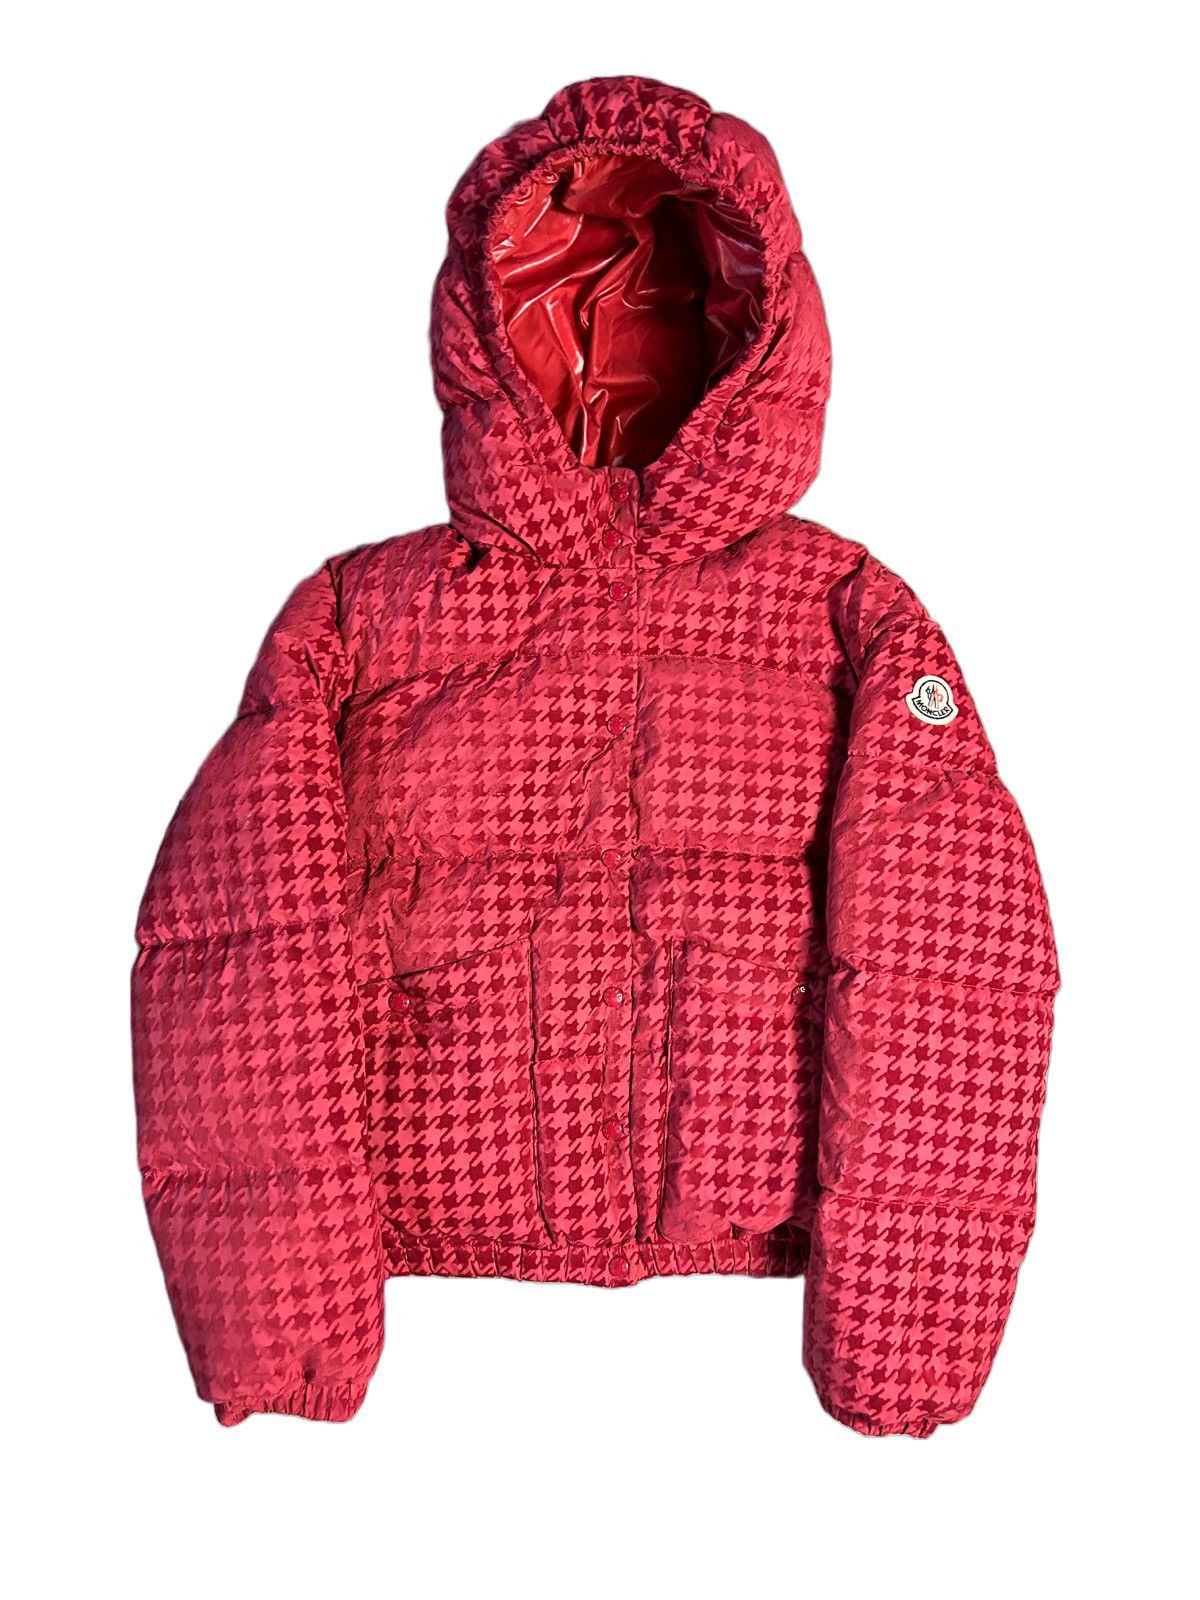 Moncler Moncler jacket down puffer red | Grailed